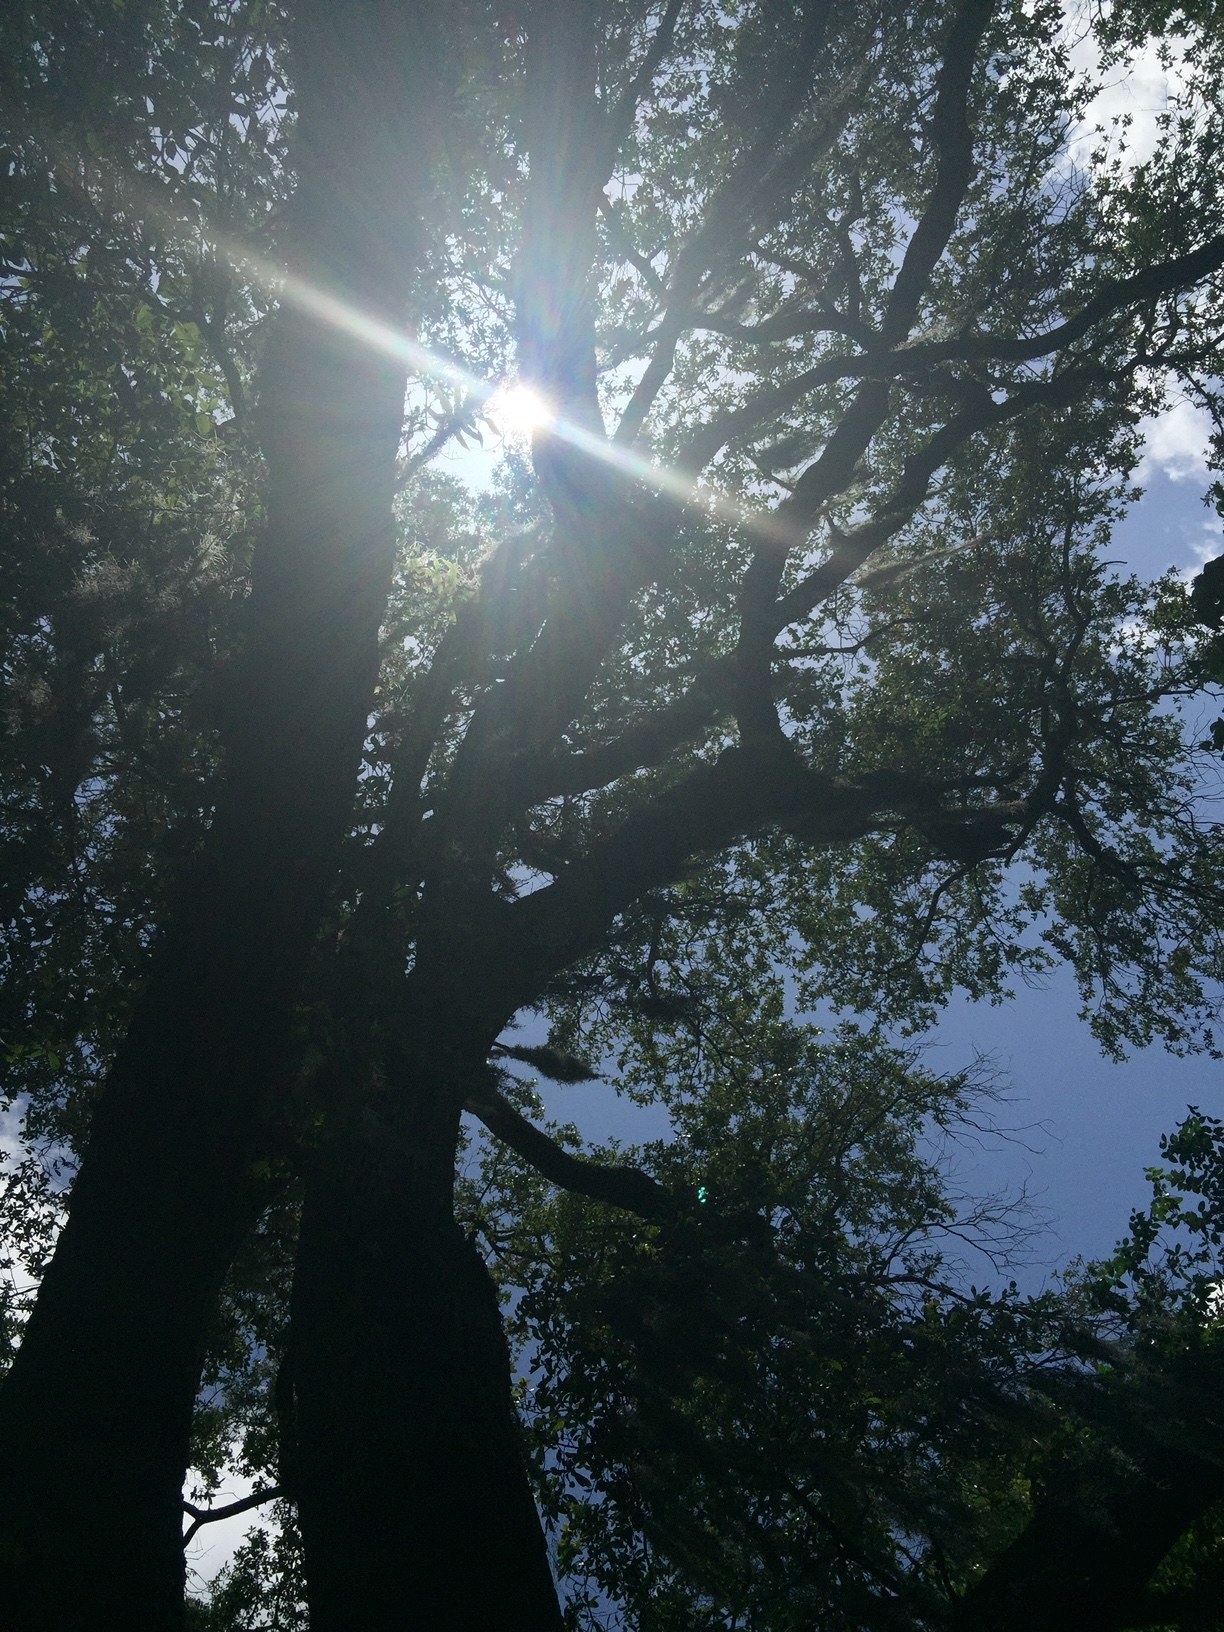 Looking up through the oak tree branches at the sun